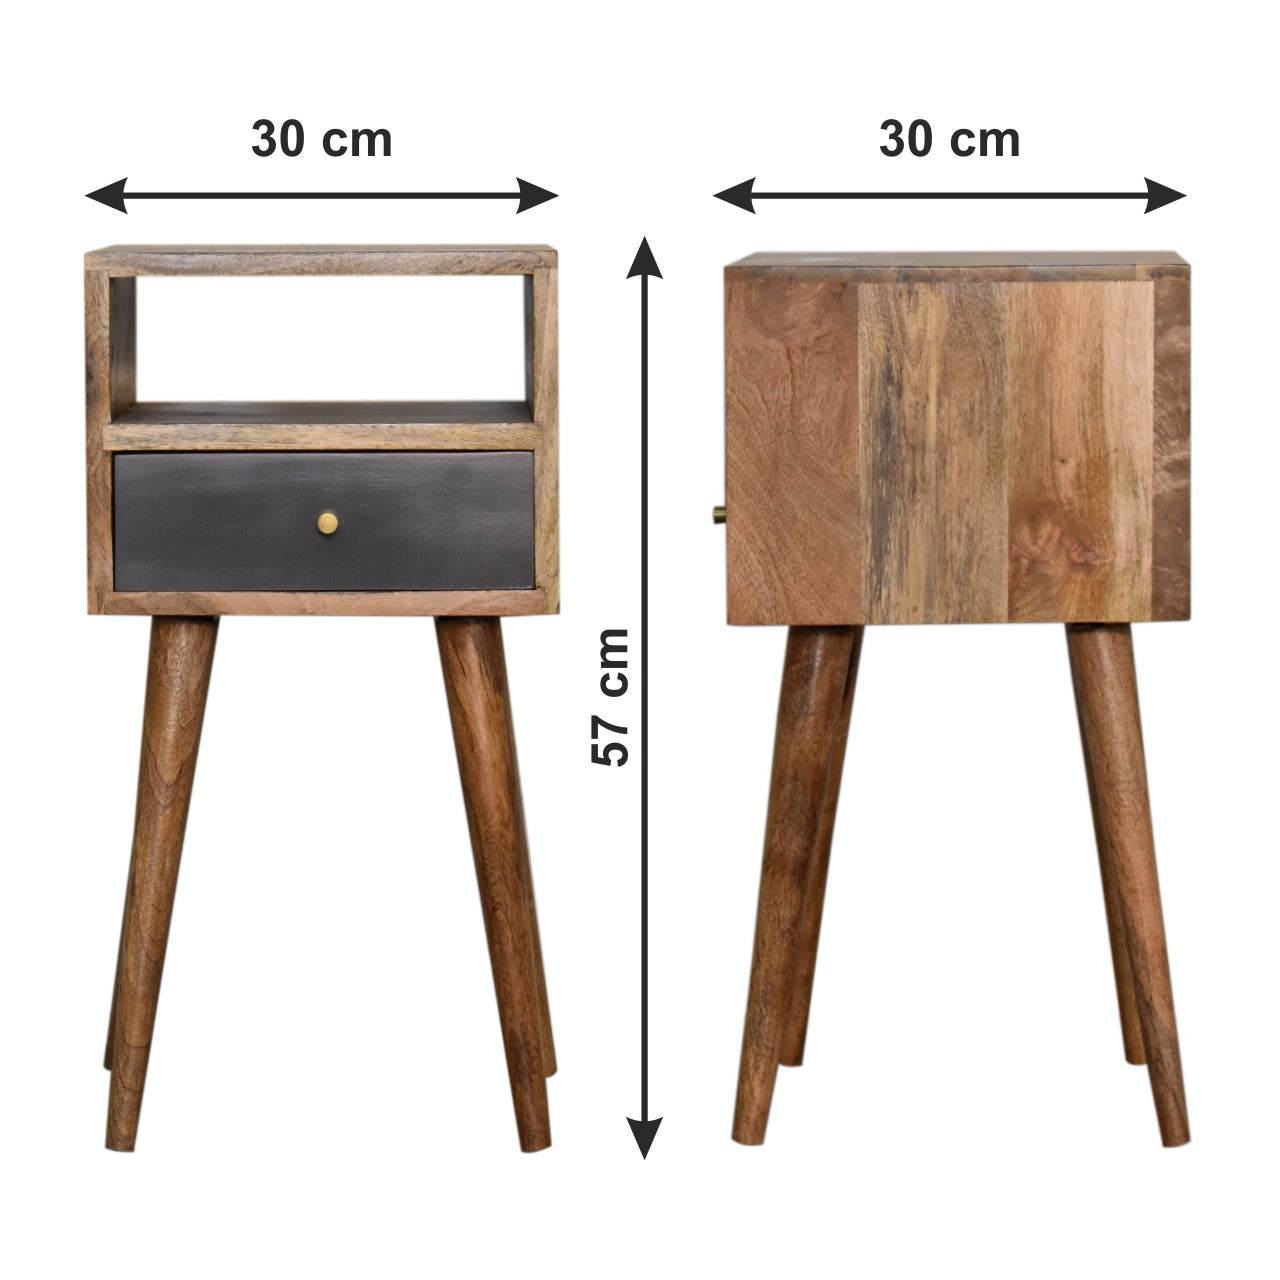 Elly Slate handpainted narrow bedside table made from solid wood | malletandplane.com